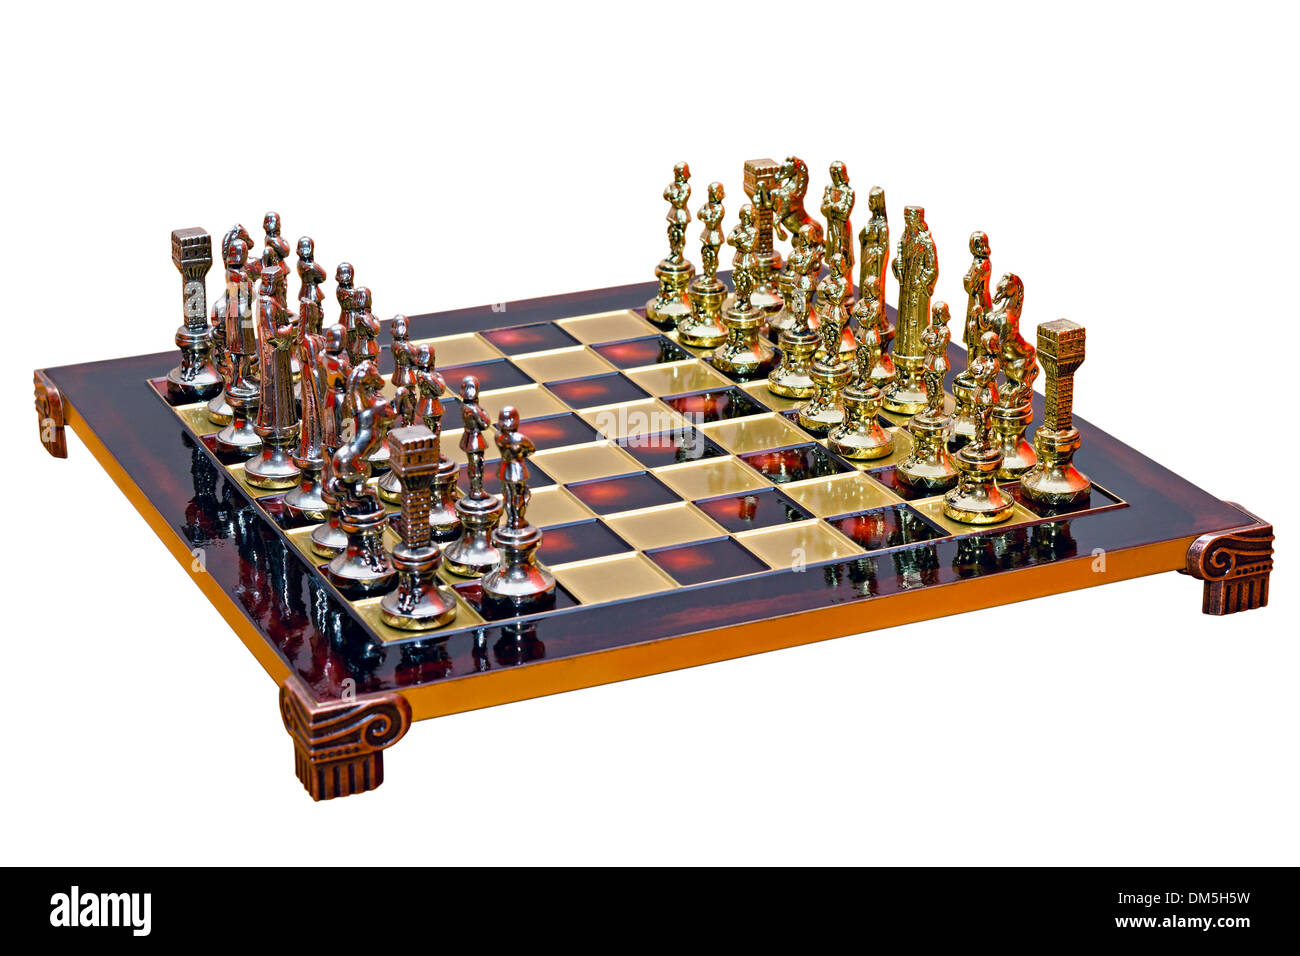 cast iron lacquered chess board isolated on white background Stock Photo